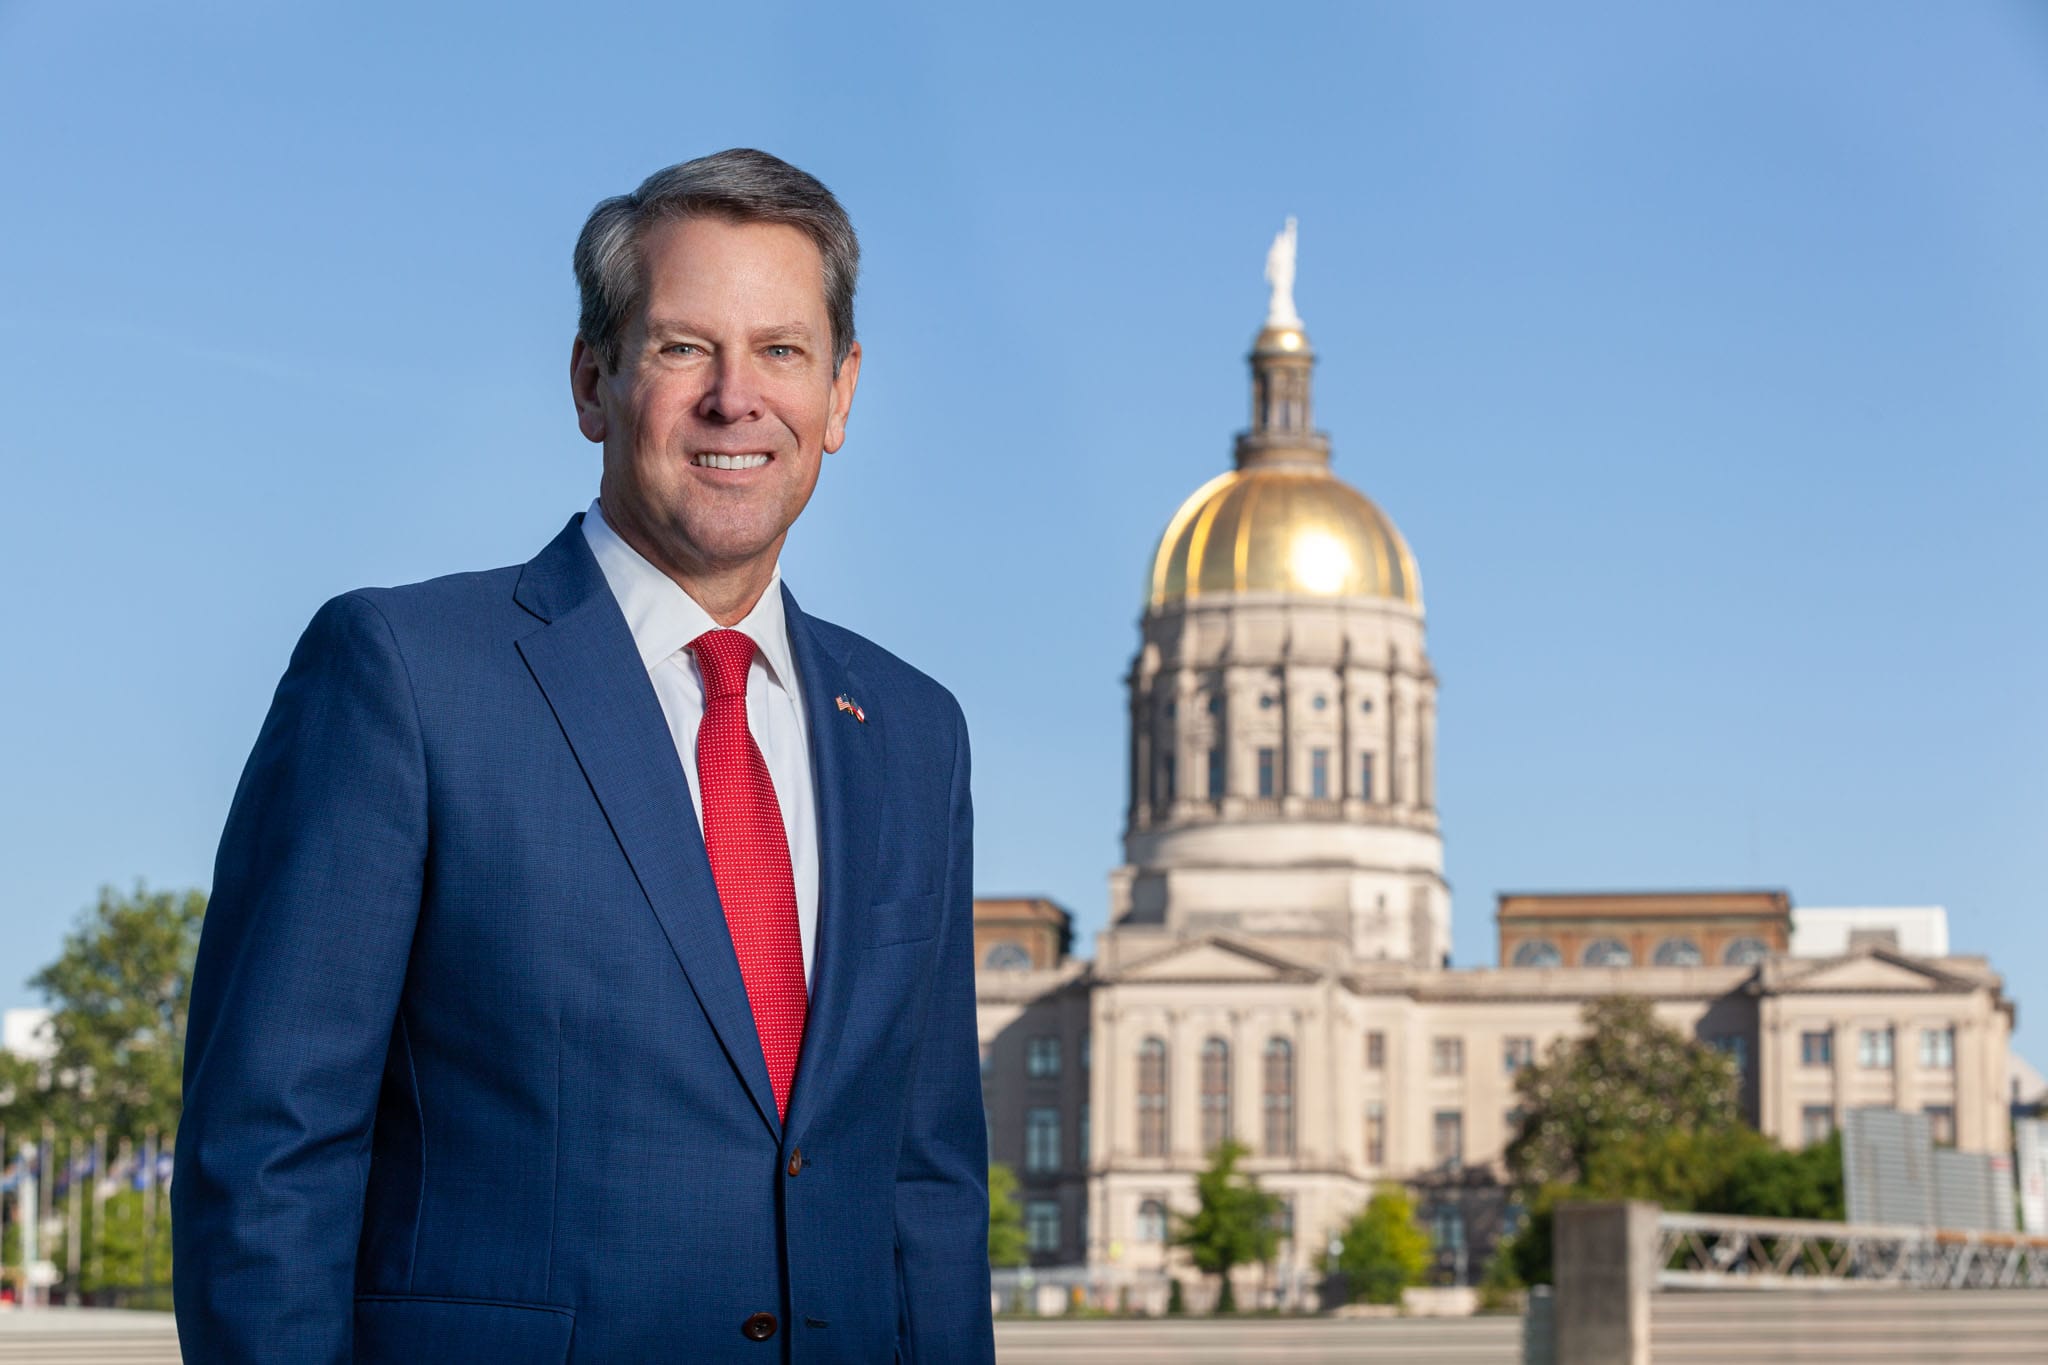 Georgia-Governor-Brian-Kemp-standing-in-front-of-the-Georgia-State-Capitol.